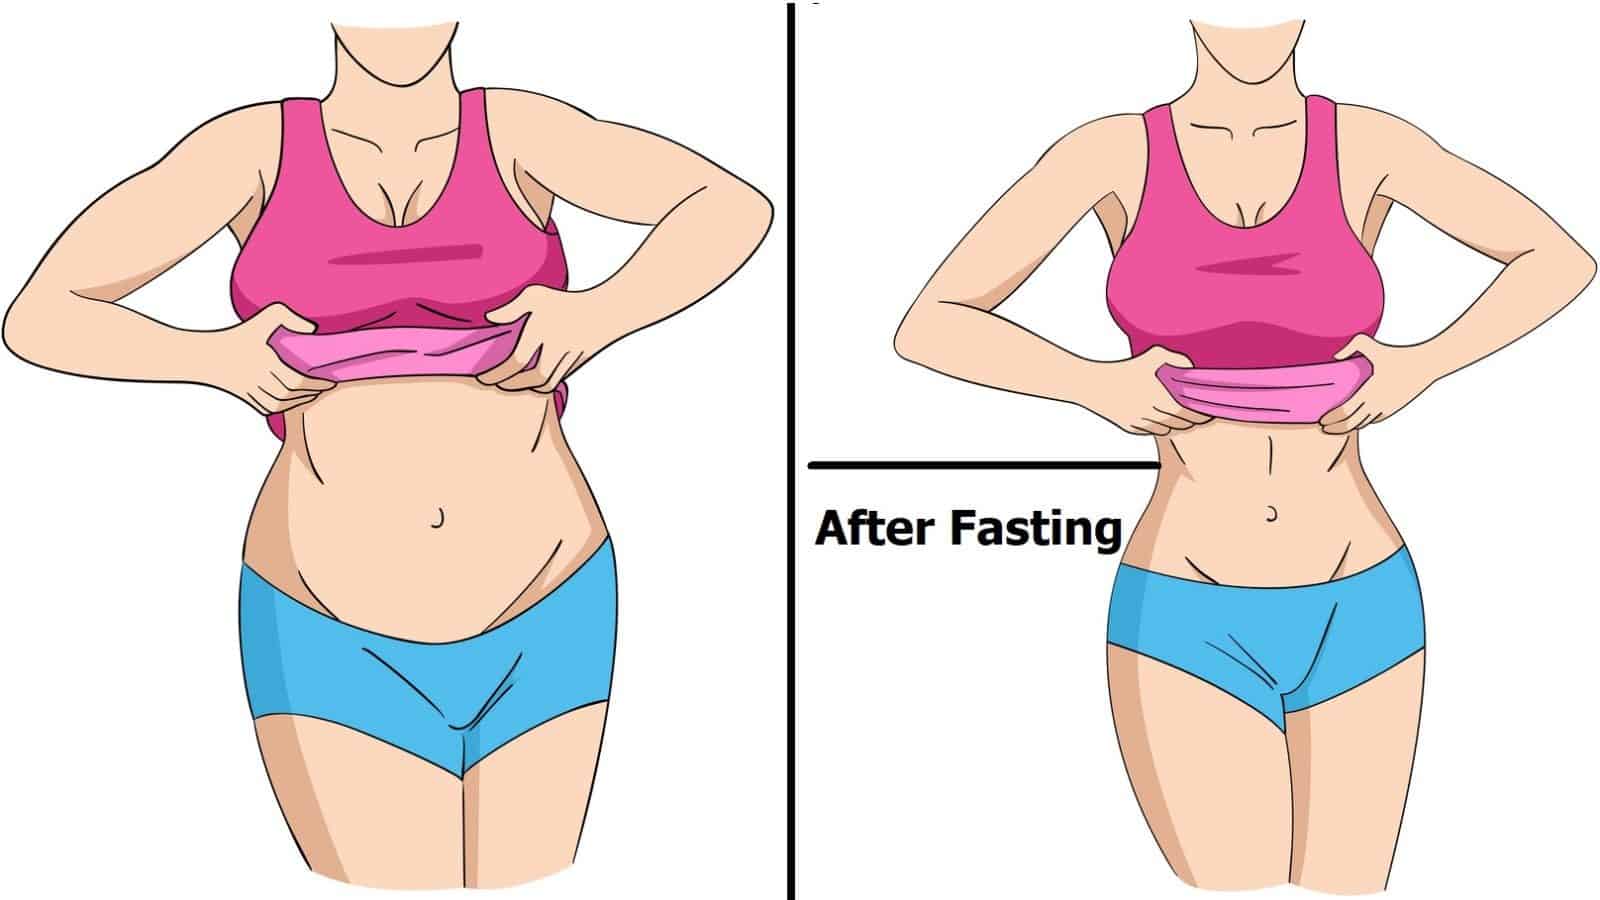 Is Intermittent Fasting Good for Long Term Health? Weigh the Pros & Cons